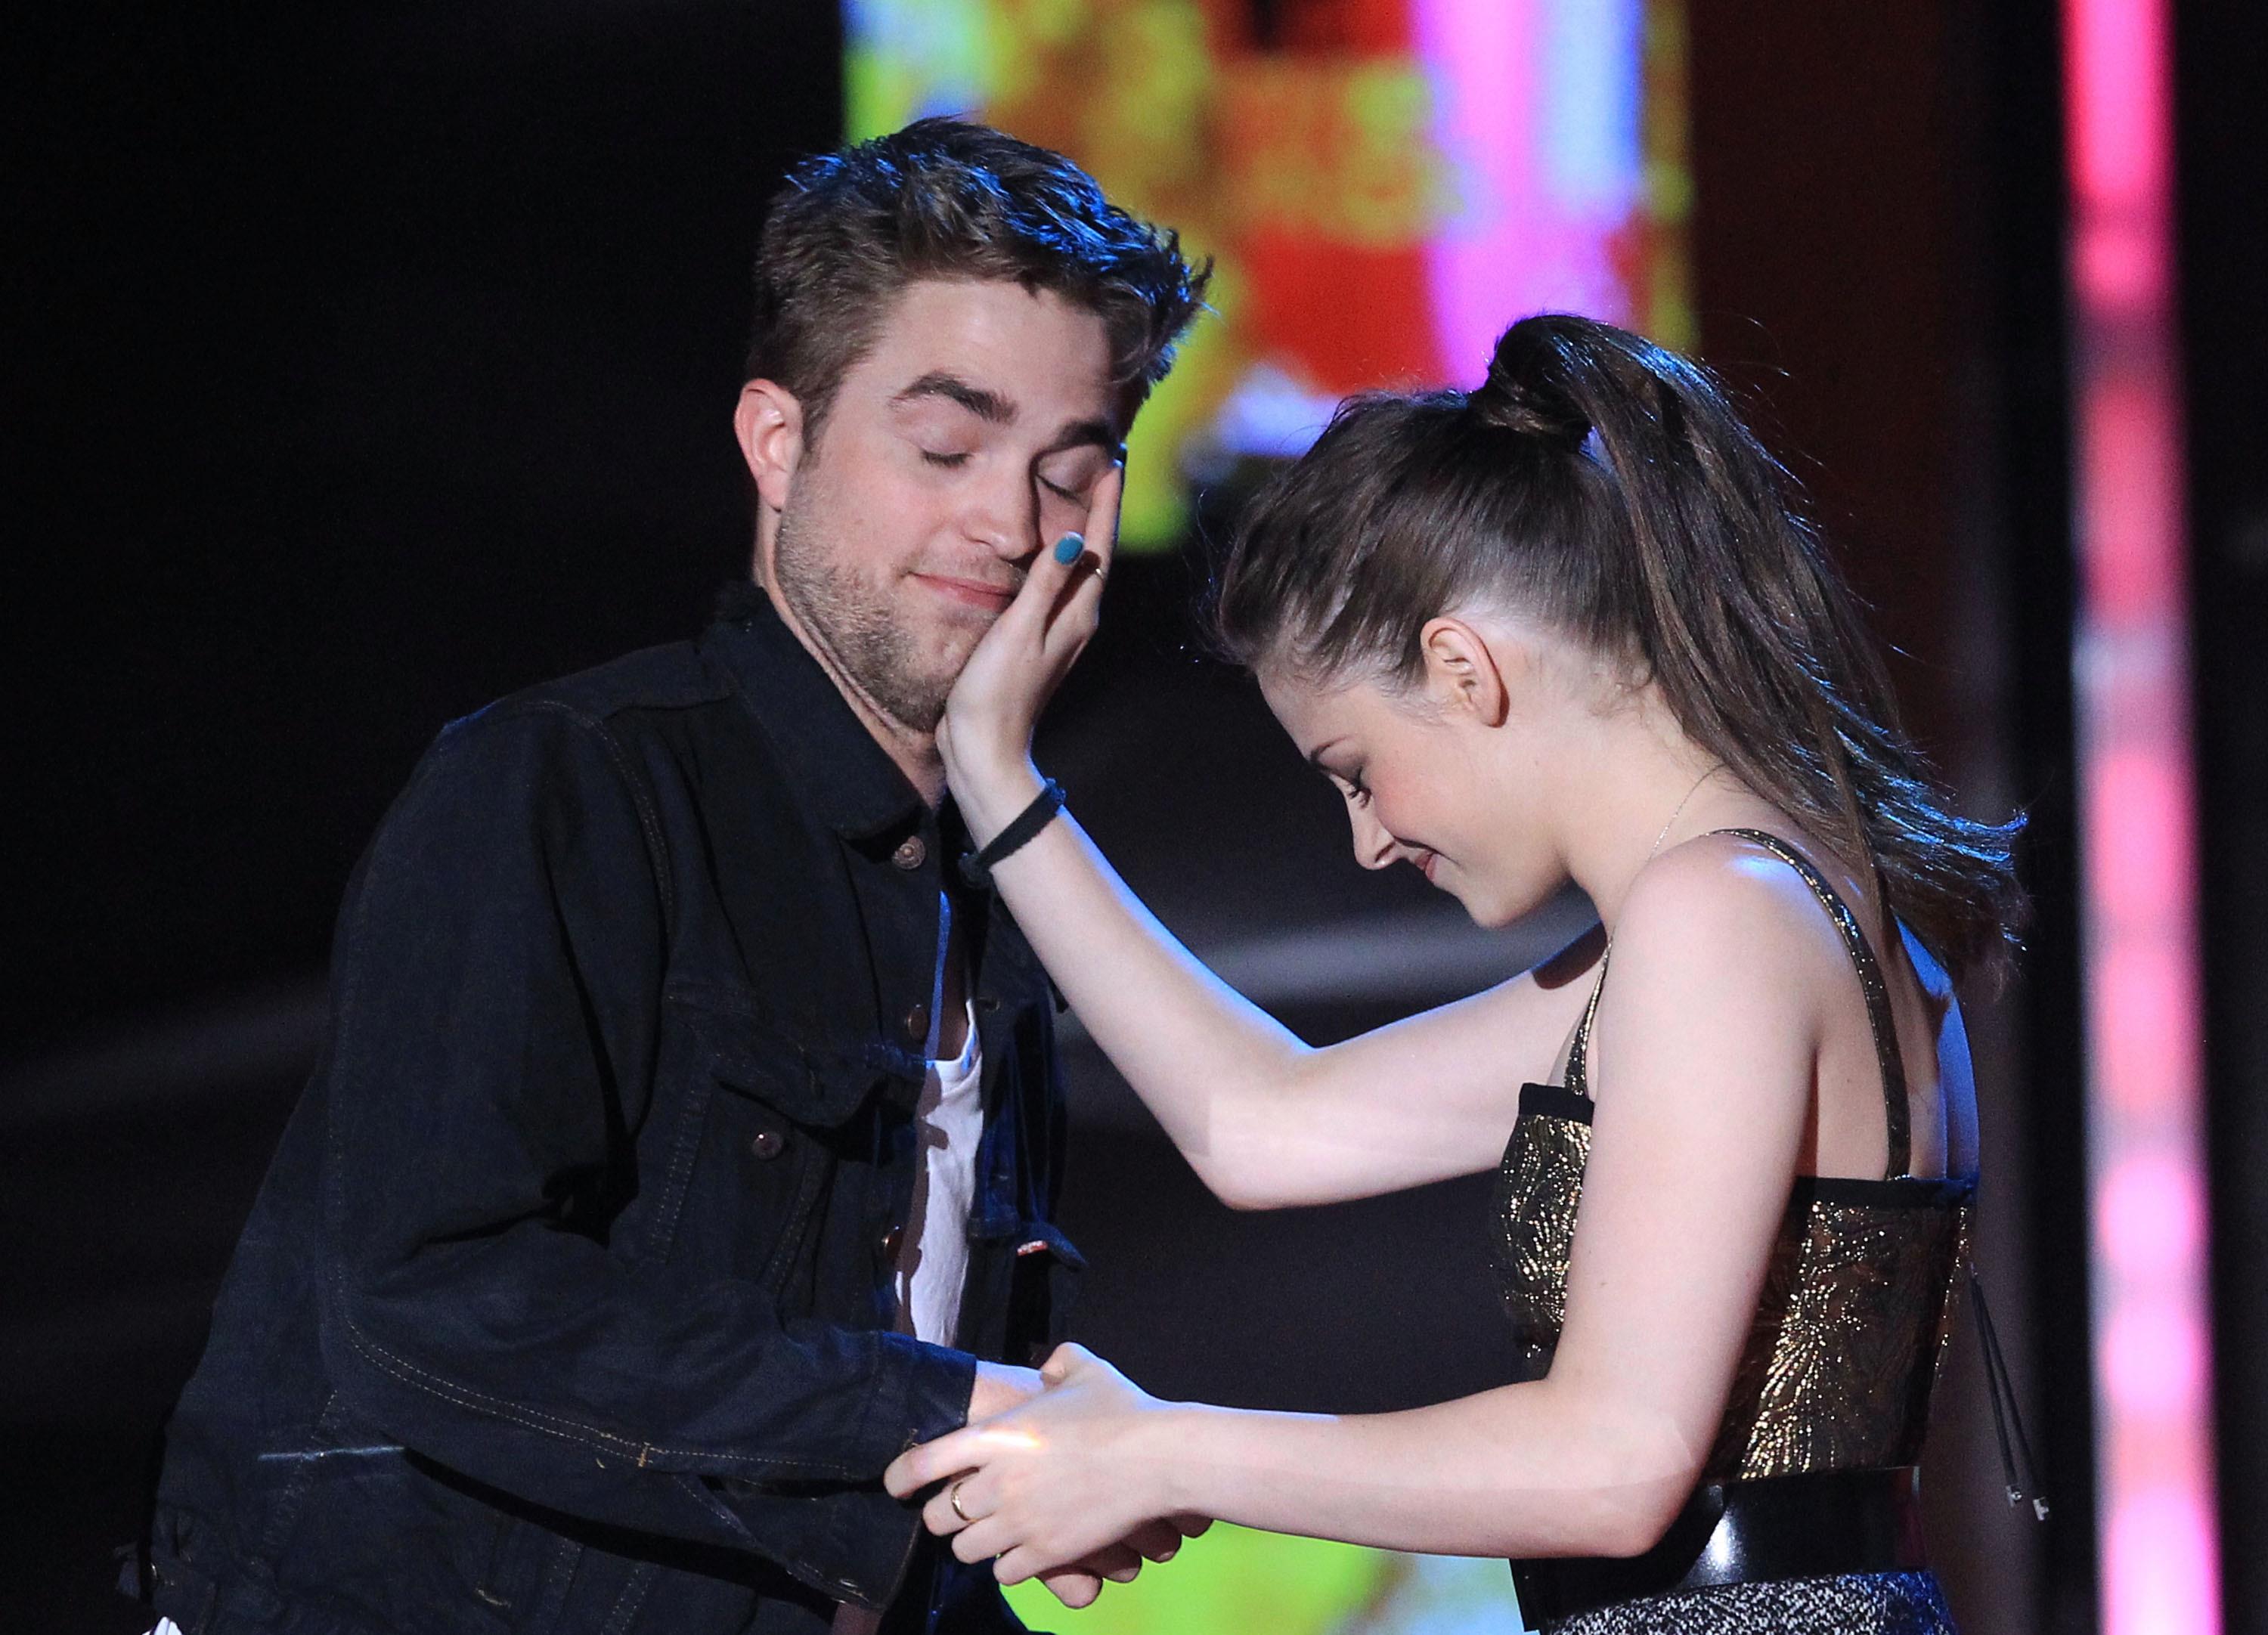 See Robert Pattinson and Kristen Stewart's Cutest Moments Together